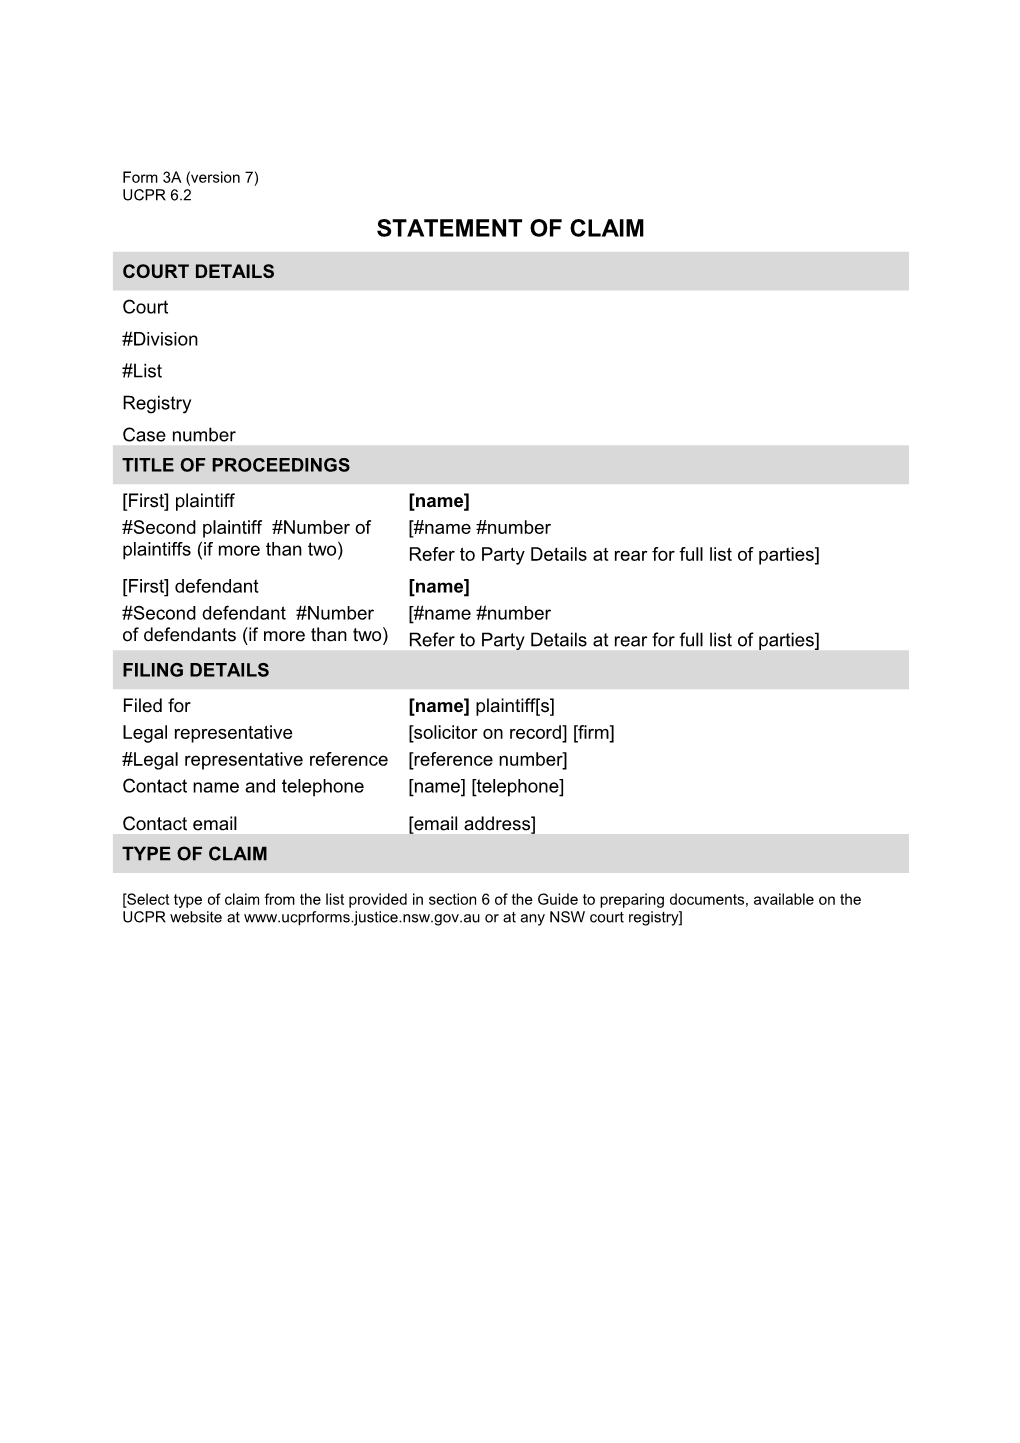 Form 3A - Statement of Claim